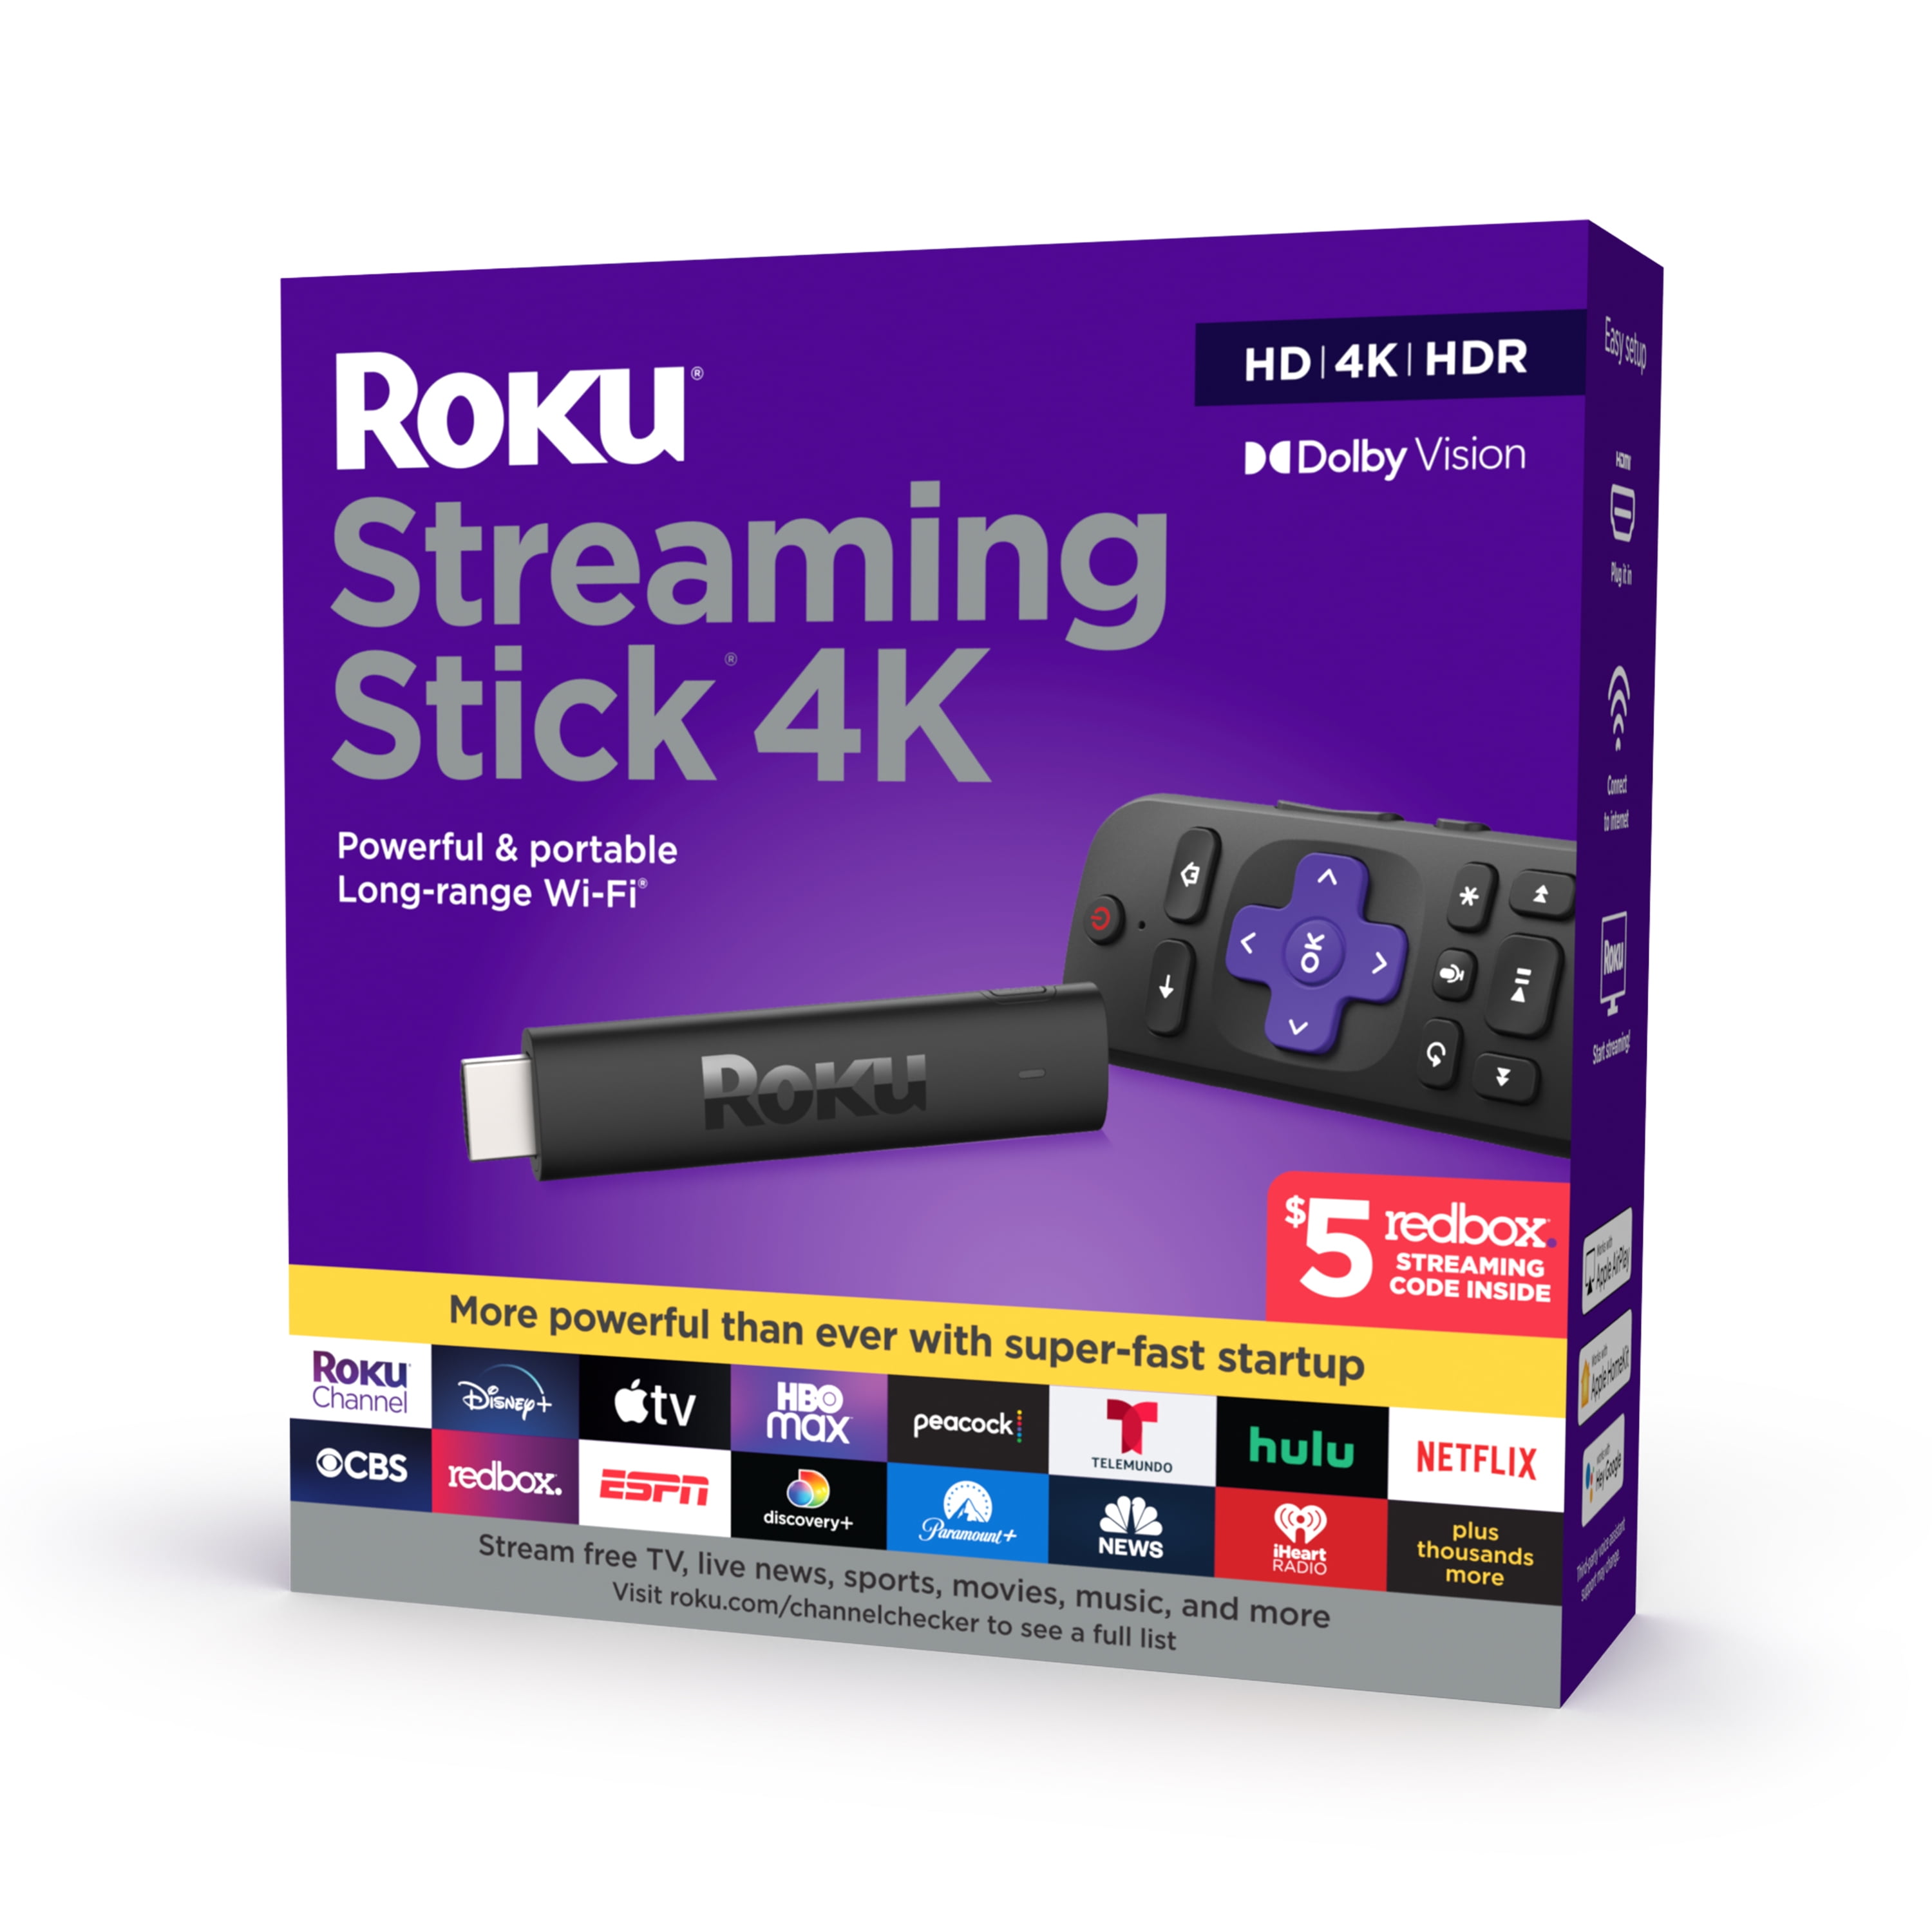 Roku Streaming Stick 4K Streaming Device 4K/HDR/Dolby Vision with Voice Remote and TV Controls